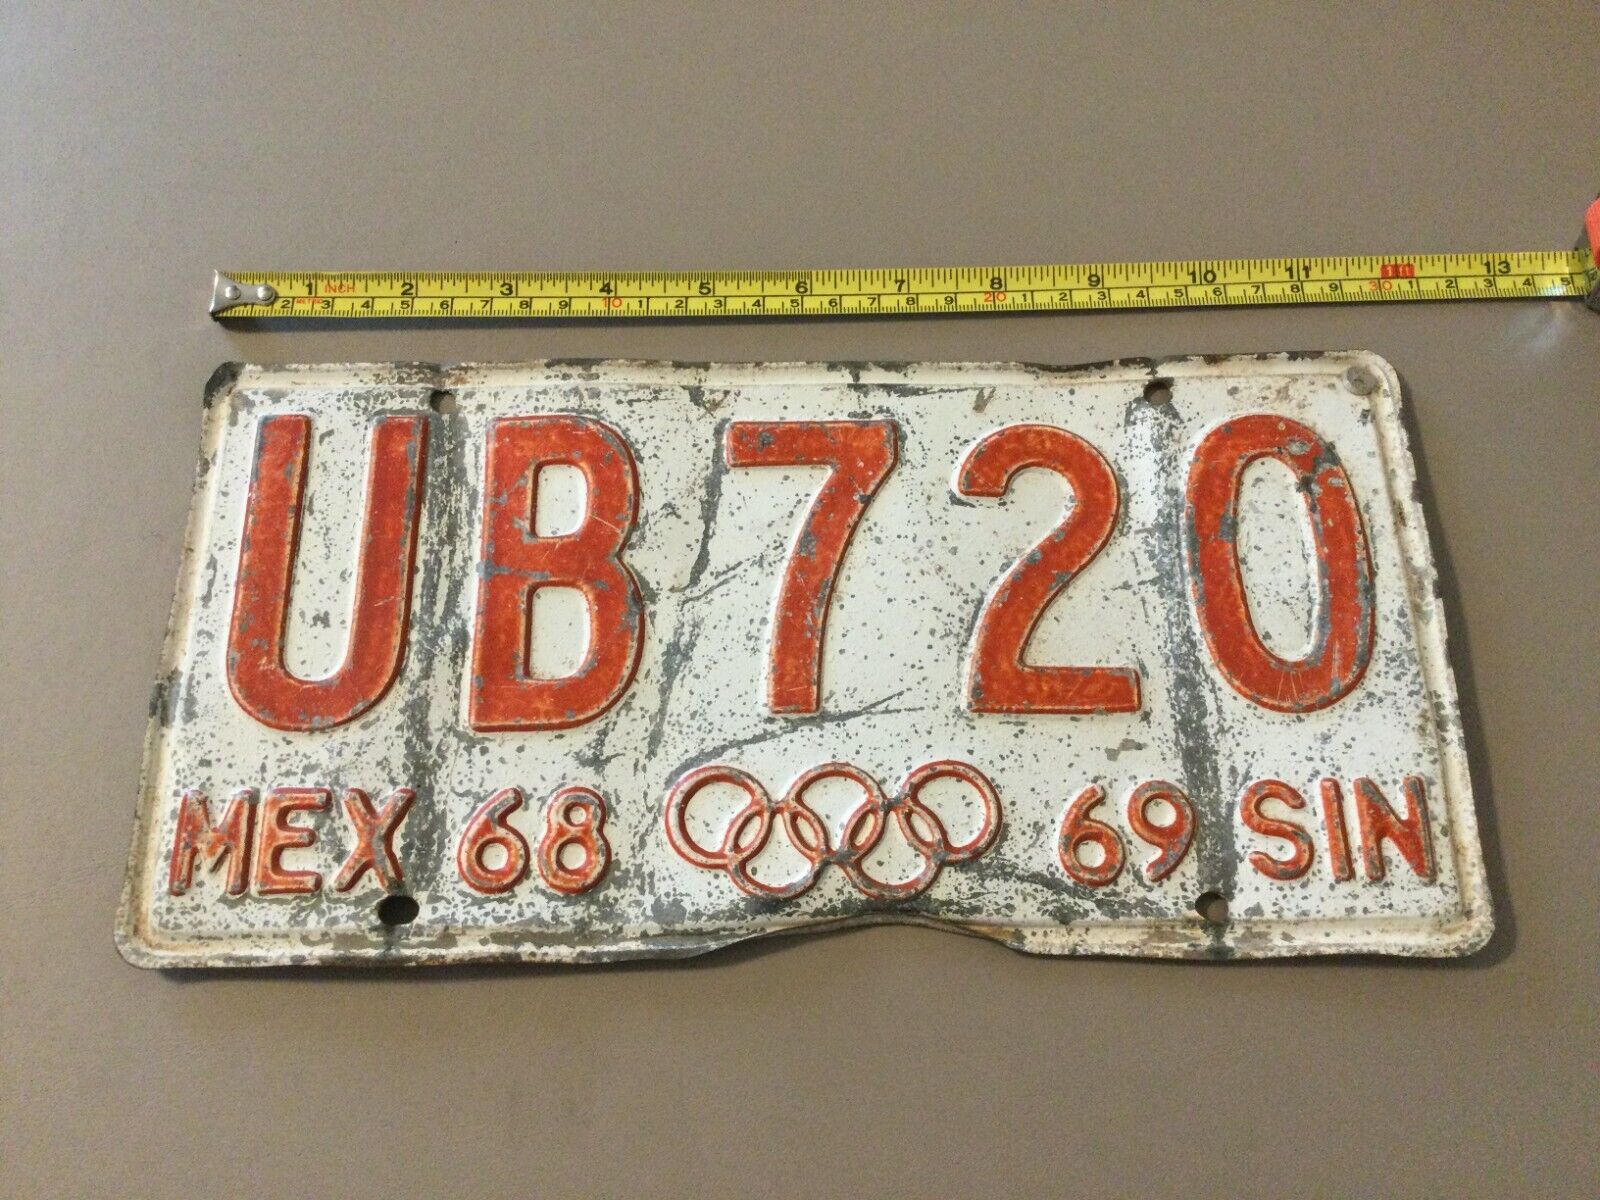 MEX 68 (olympic rings)  69 SIN-License Plate- Expired - Man Cave - Arts & Crafts